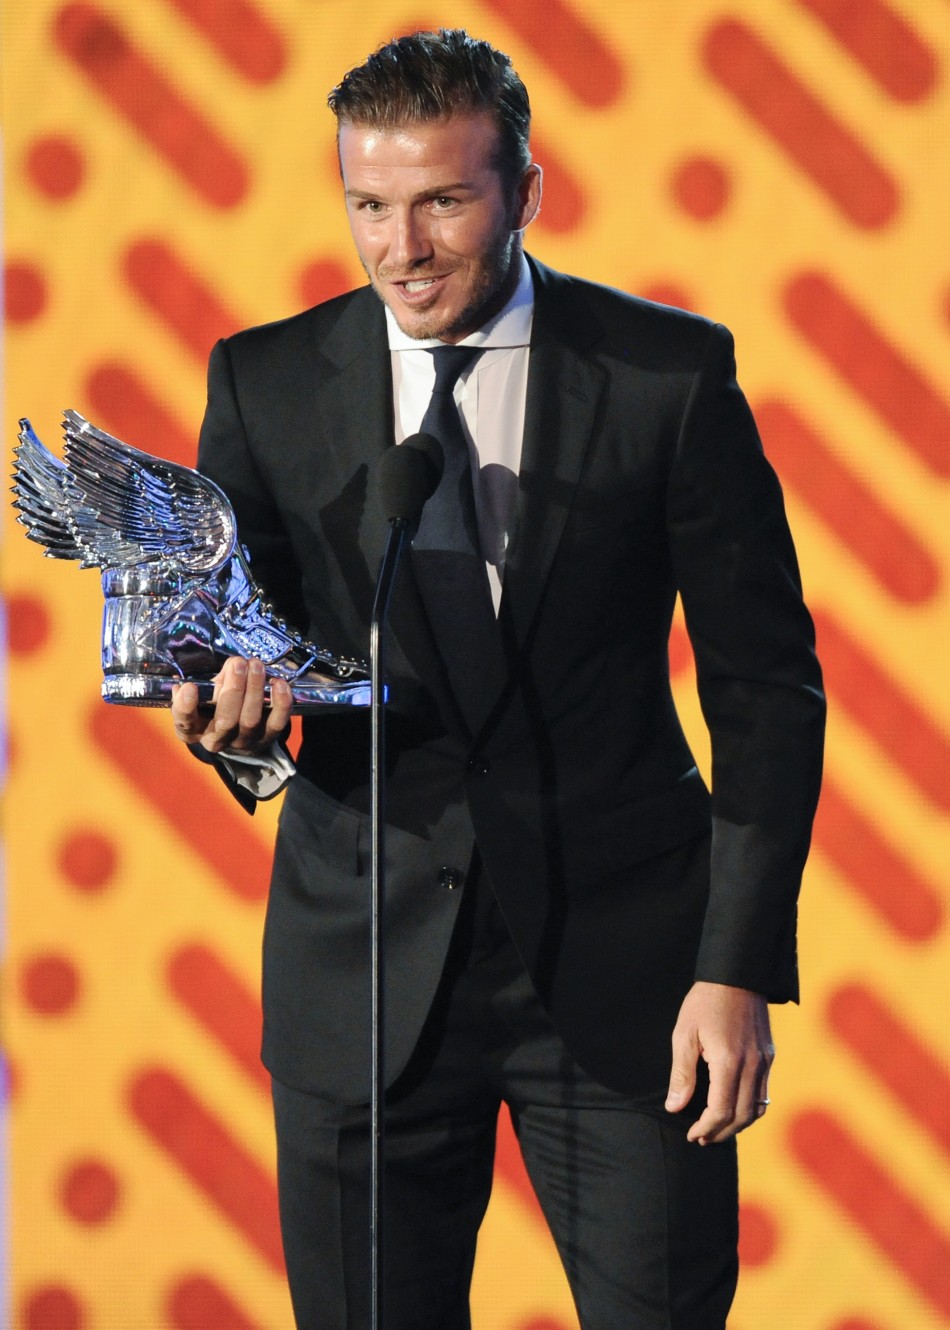 David Beckham accepts the Do Something Athlete award during the Do Something Awards in Los Angeles, California August 14, 2011.